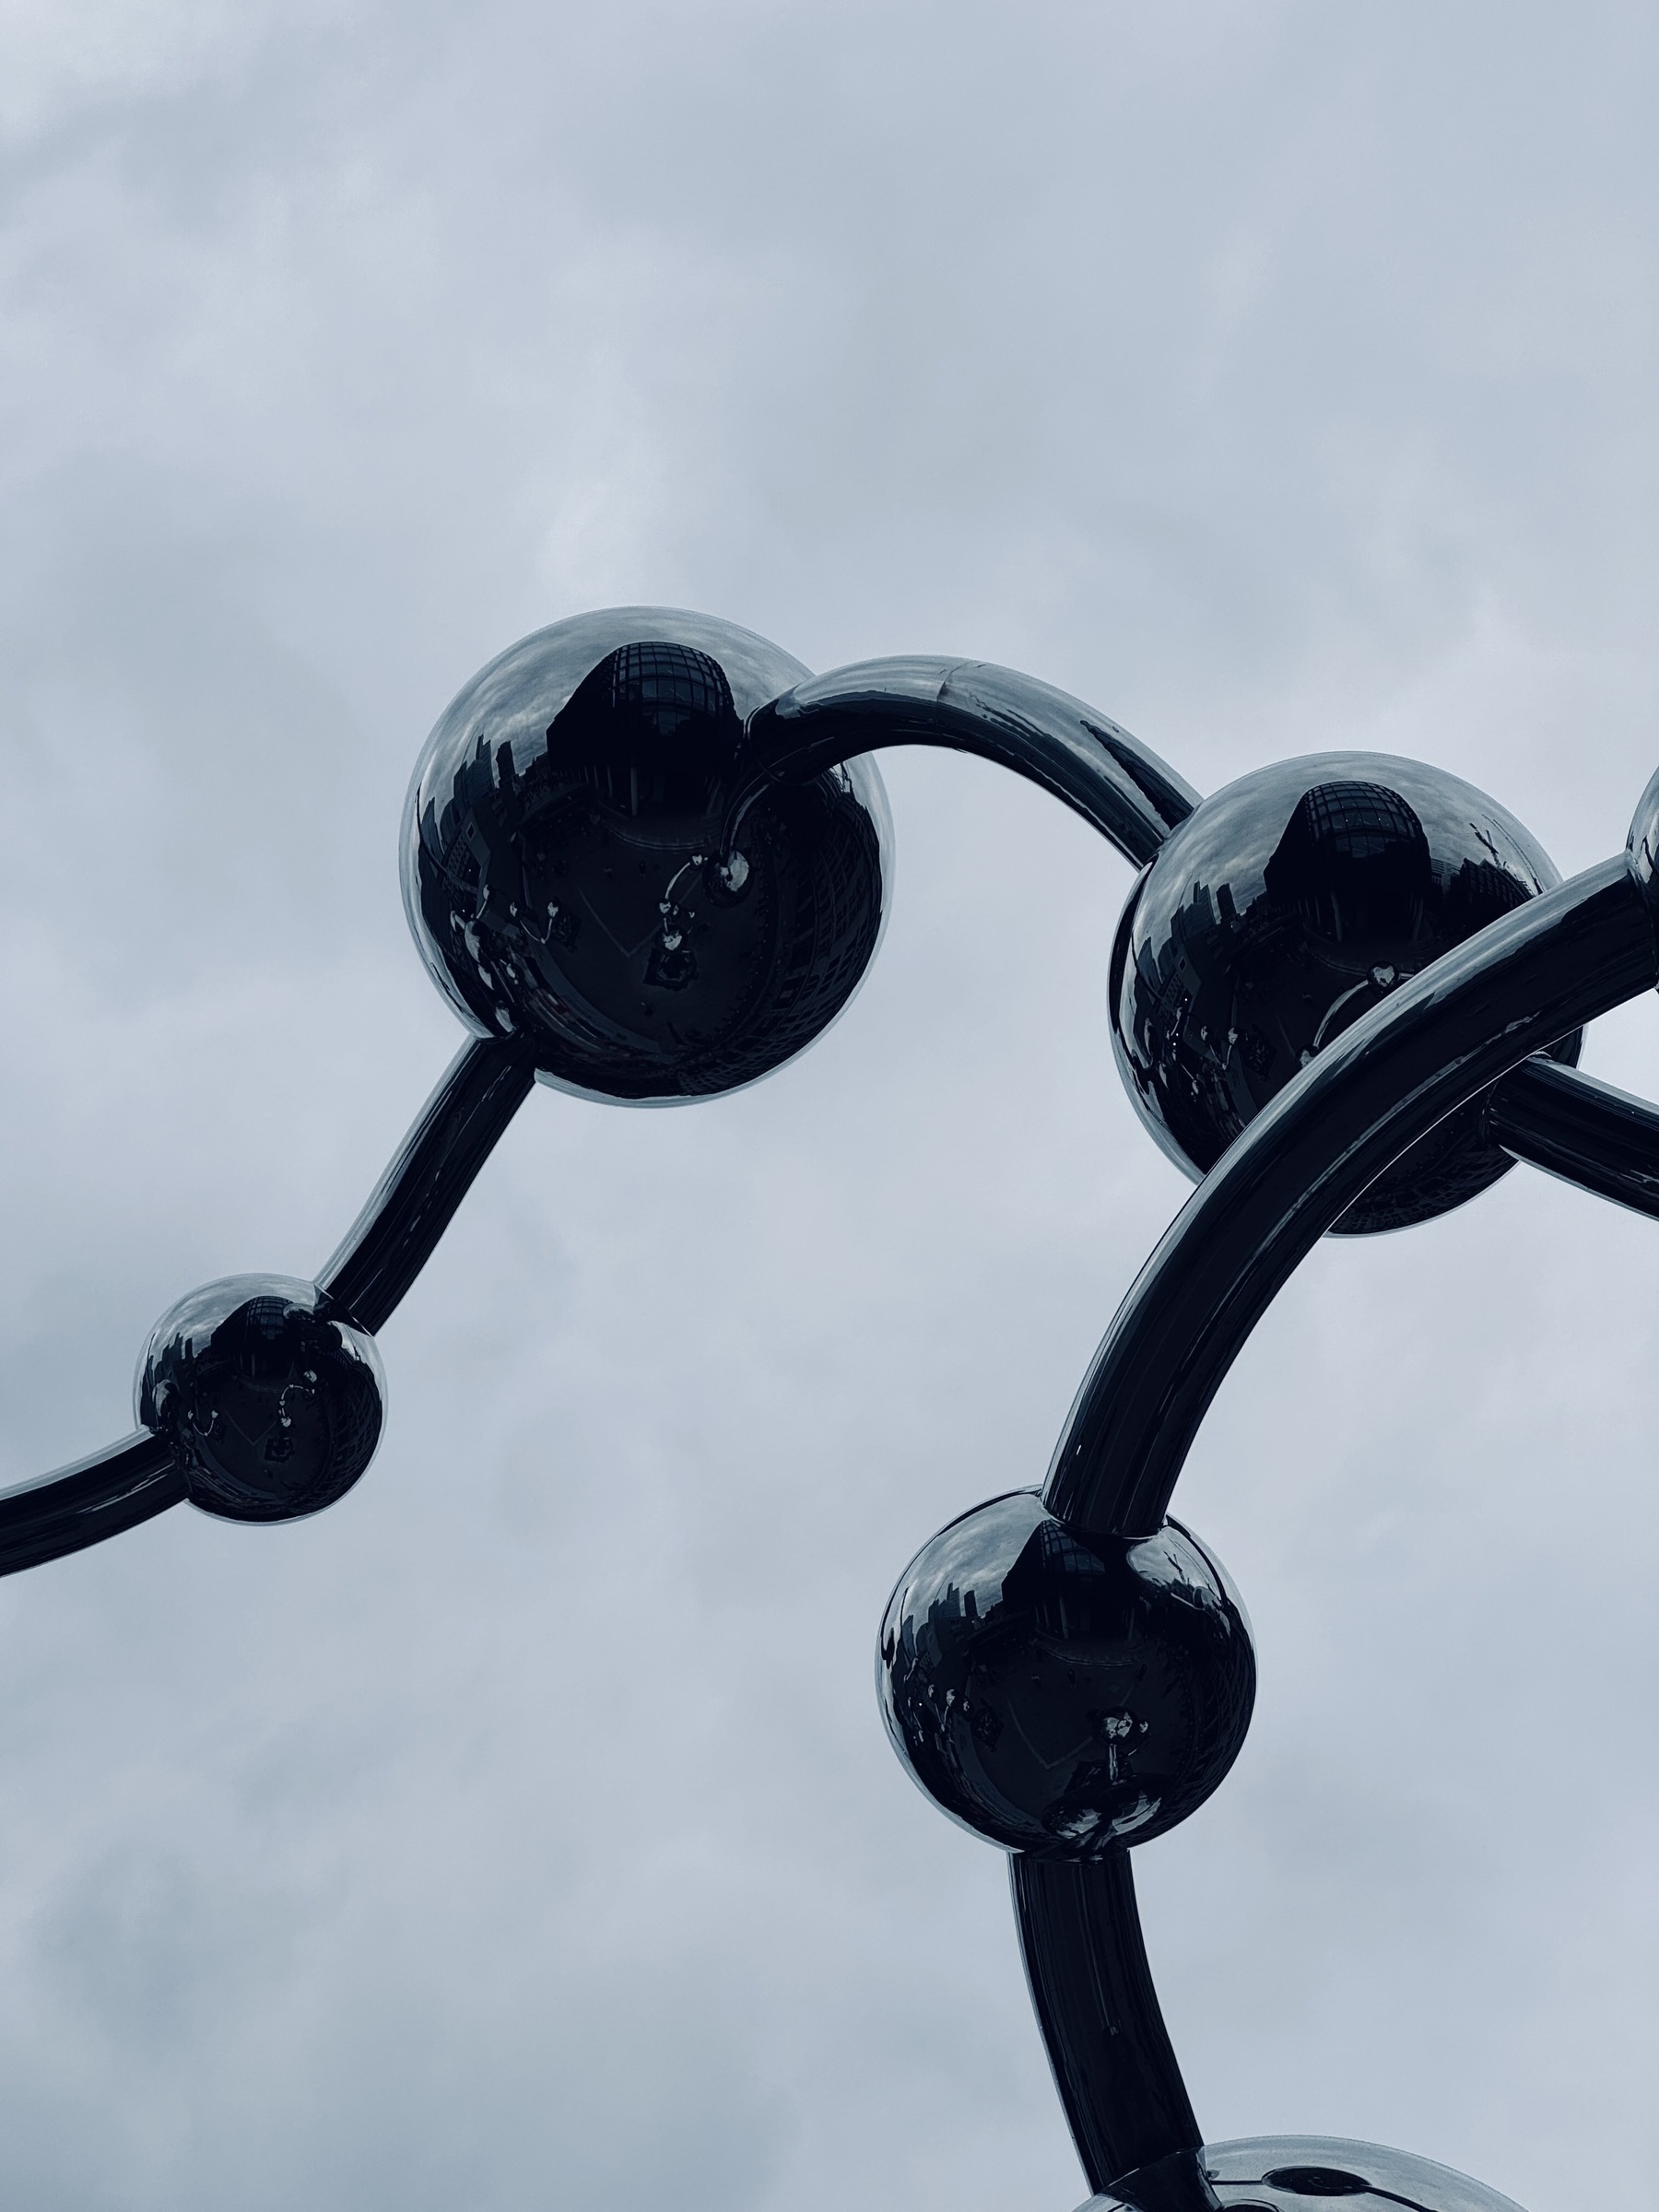 A shiny metal sculpture of balls on twisty supports.